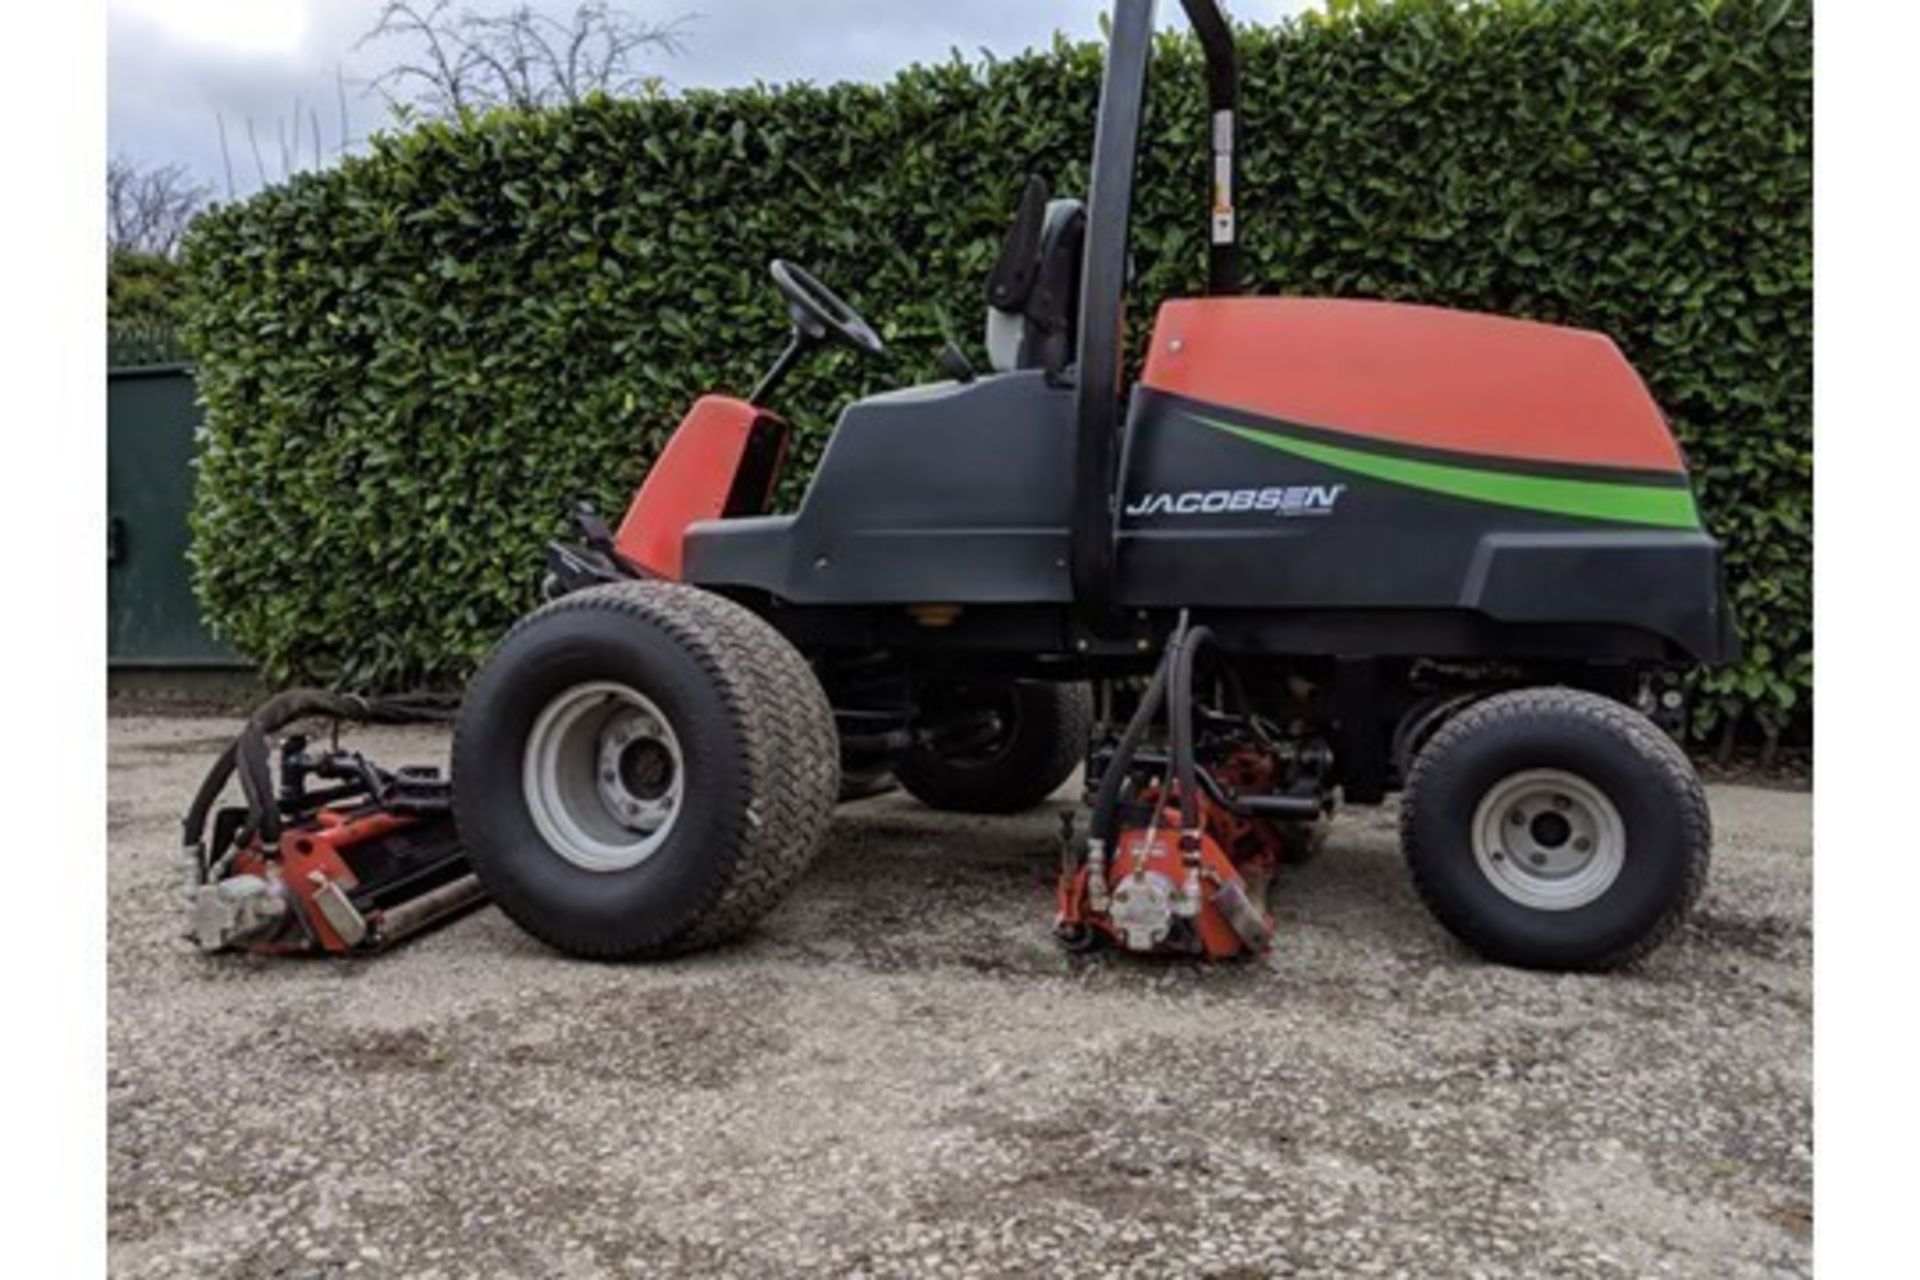 2007 Ransomes Jacobsen LF3800 4WD Cylinder Mower - Image 2 of 8